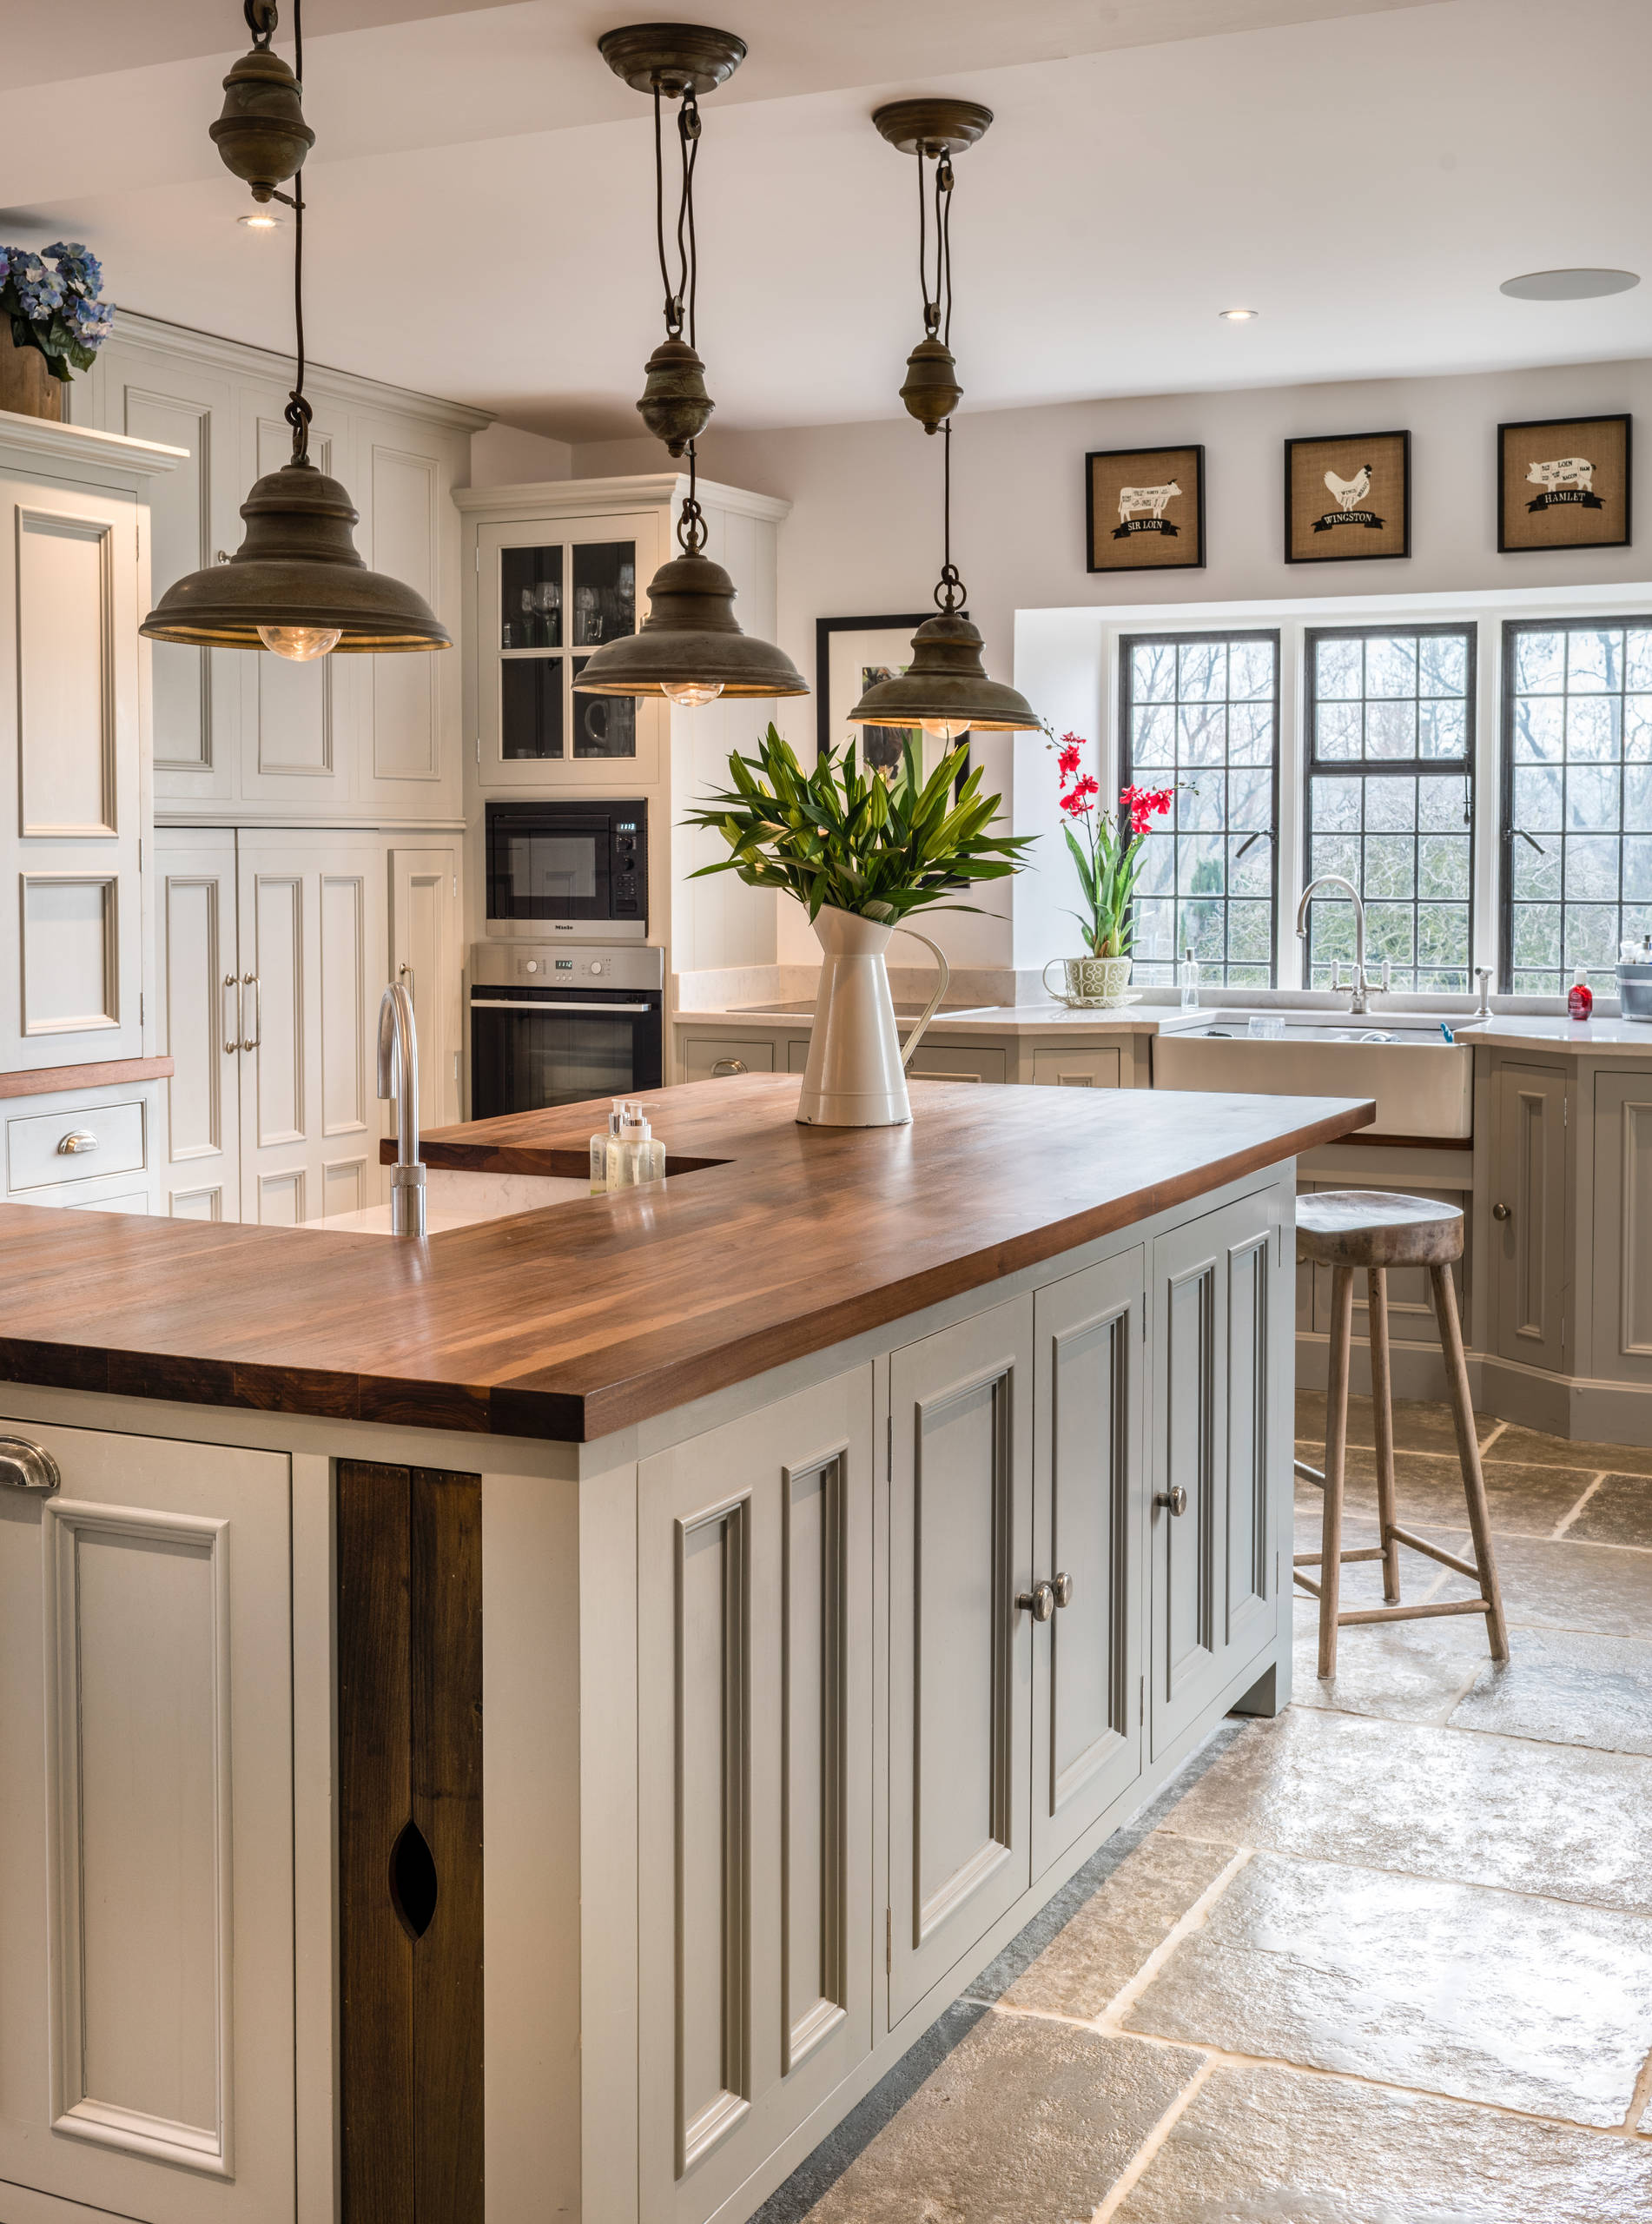 75 Farmhouse Kitchen with Wood Countertops Ideas You'll Love - July, 2023 |  Houzz